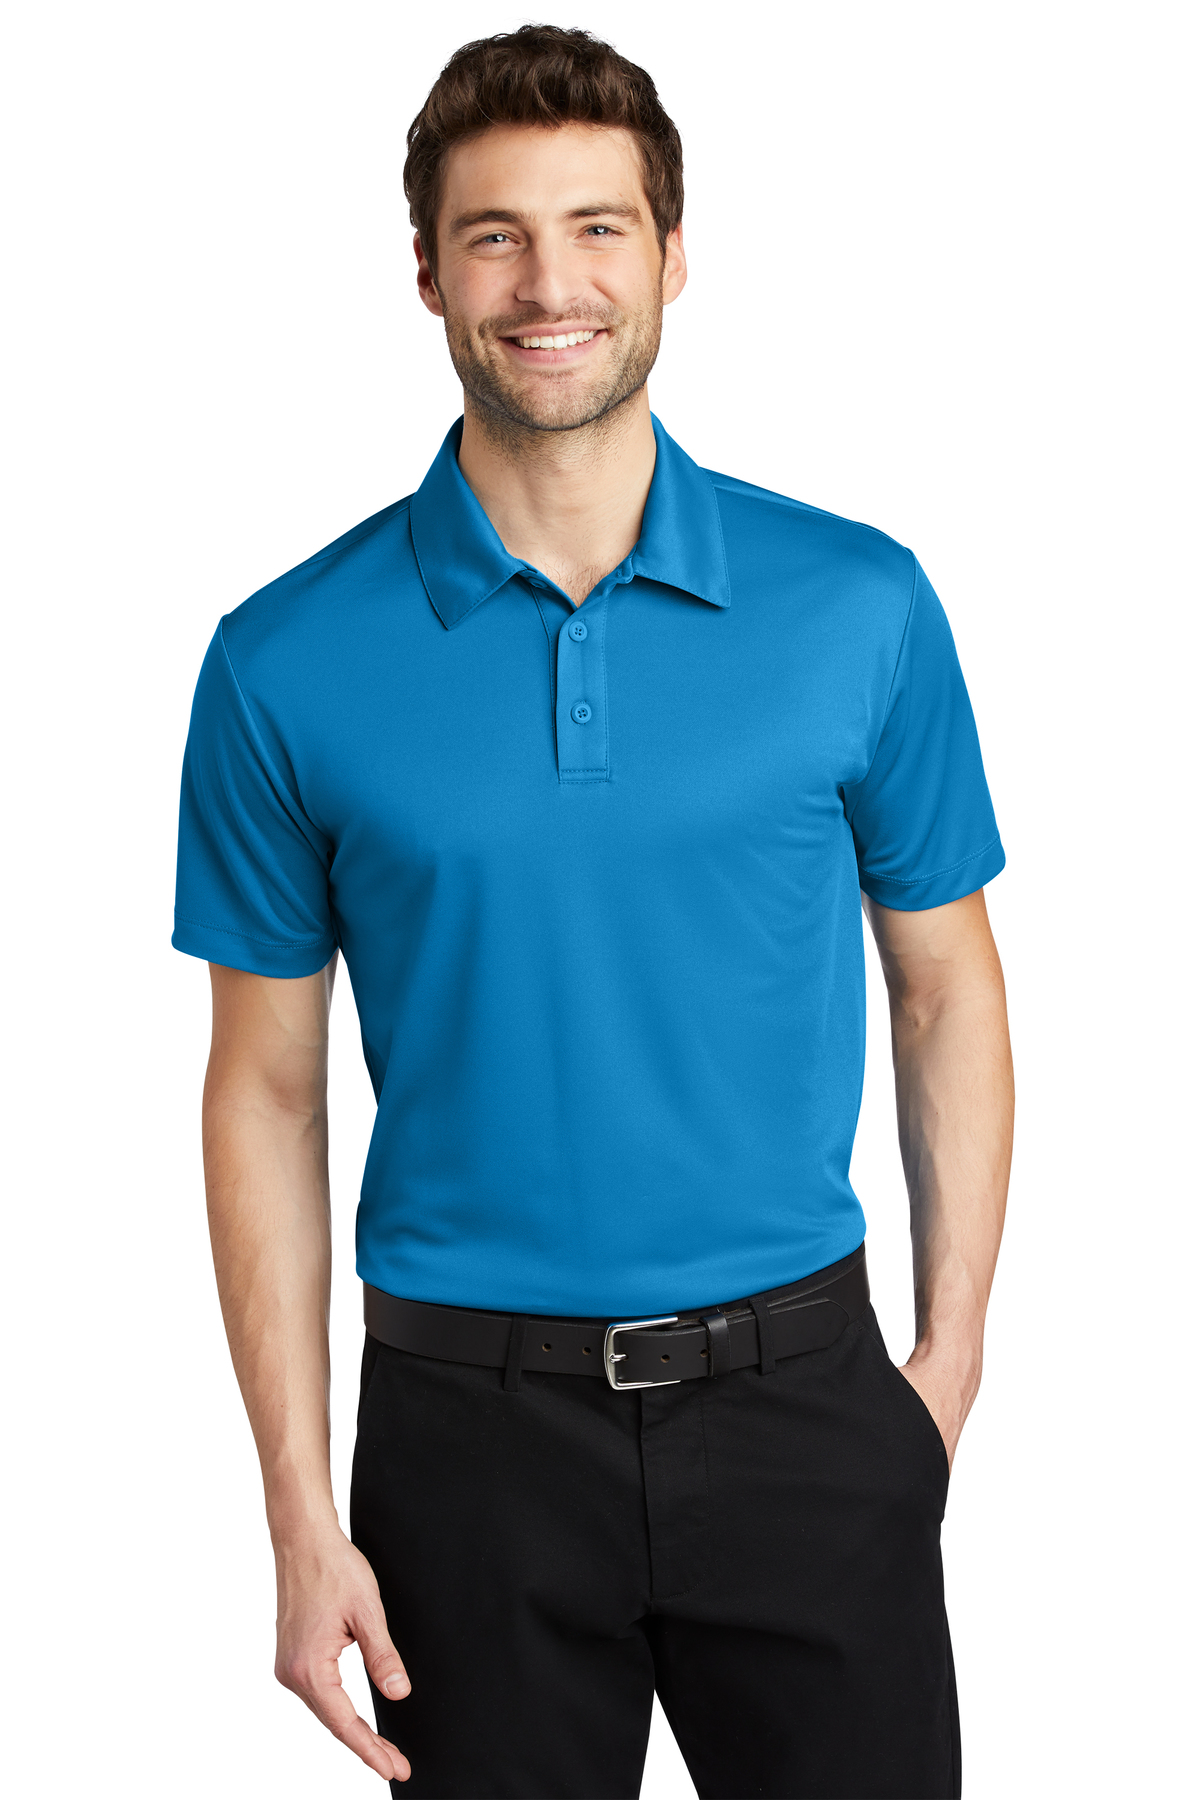 K540 - Youth & Adult moisture wicking Polo shirt -Brilliant blue